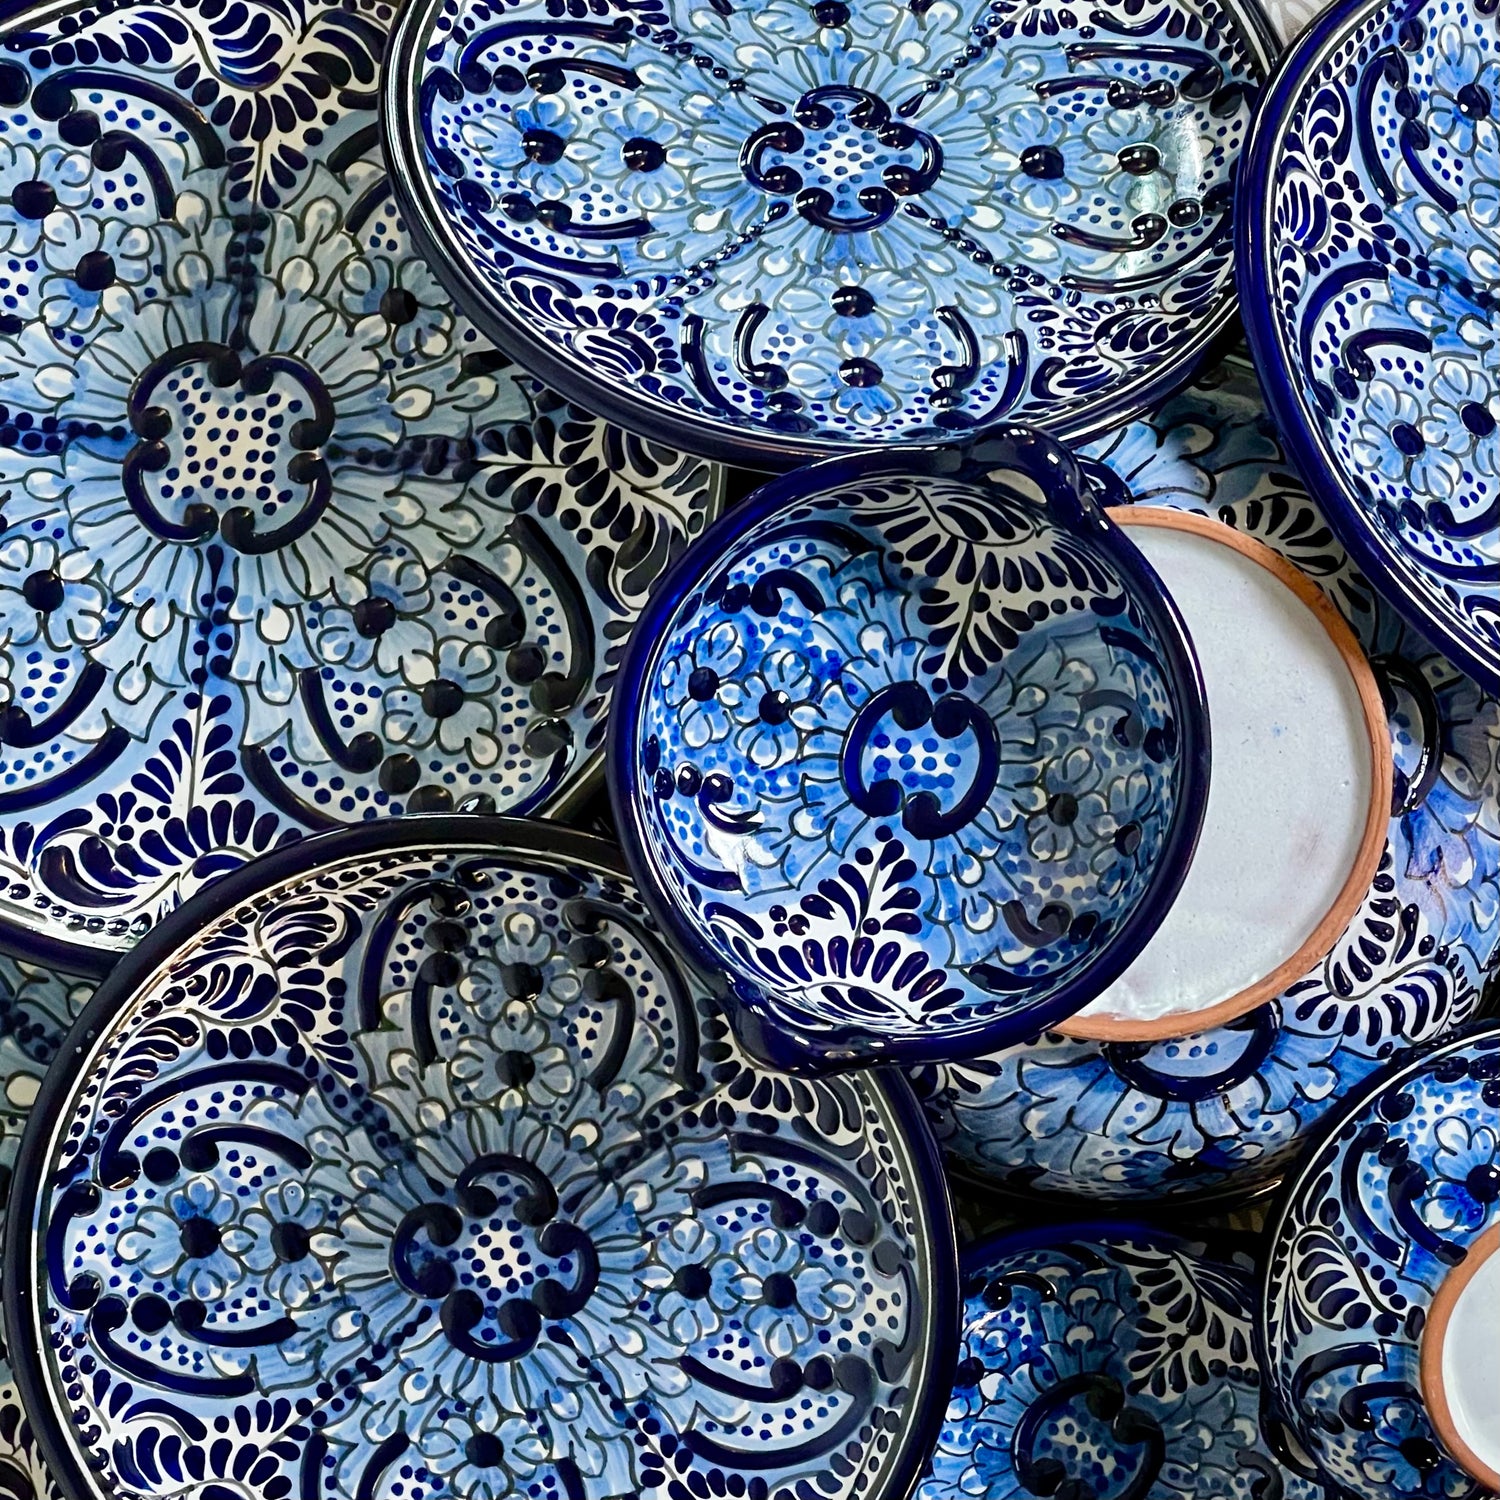 Blue Talavera plates and bowls on top of each other